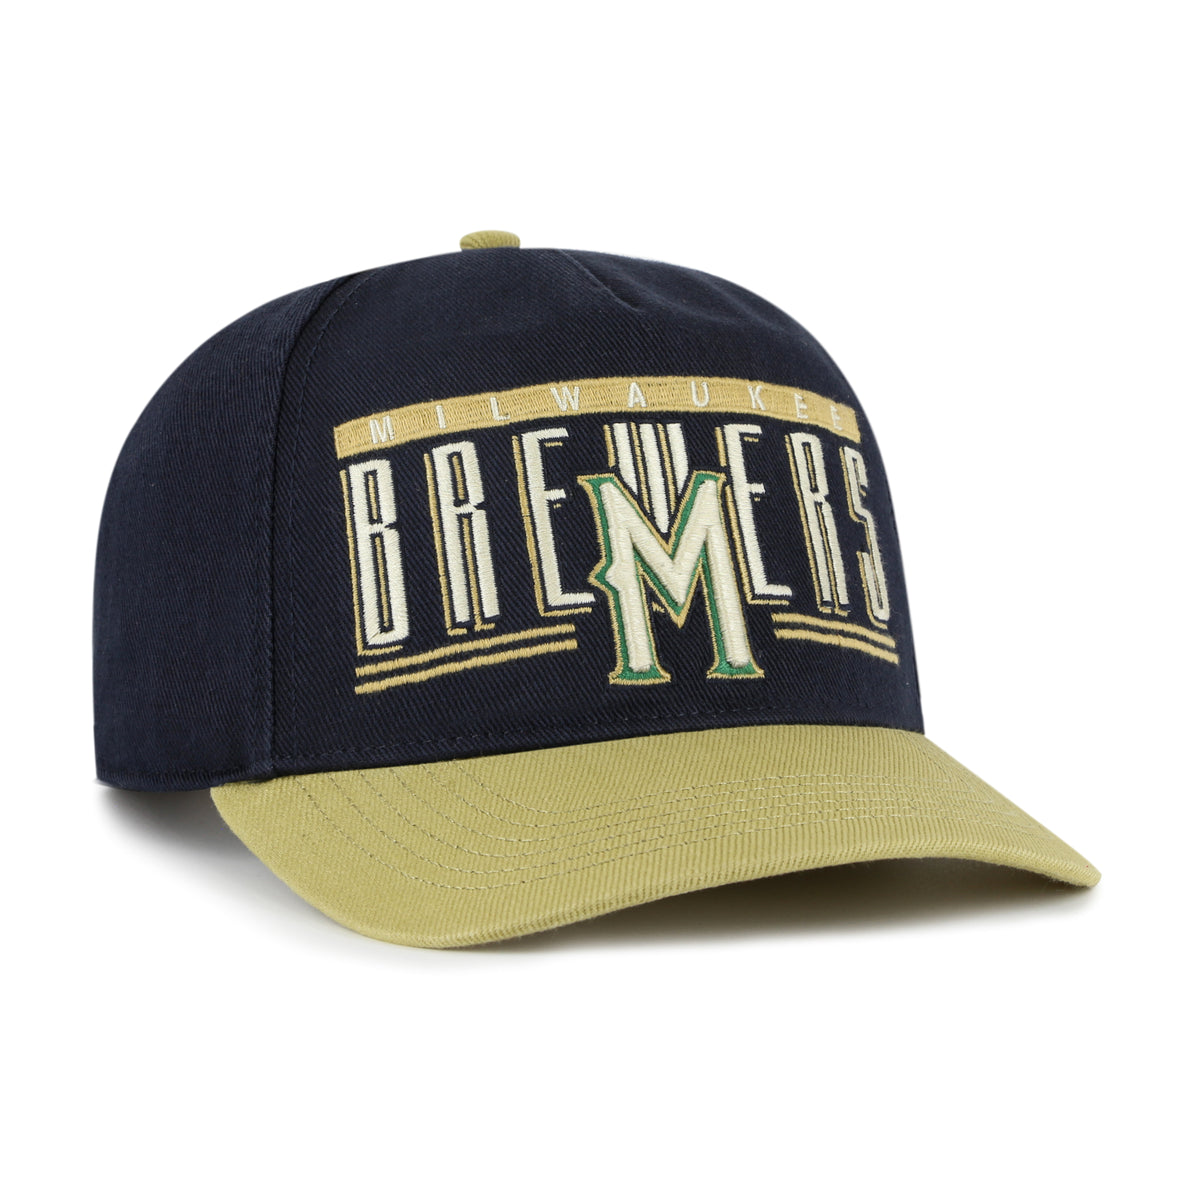 MILWAUKEE BREWERS COOPERSTOWN DOUBLE HEADER BASELINE '47 HITCH